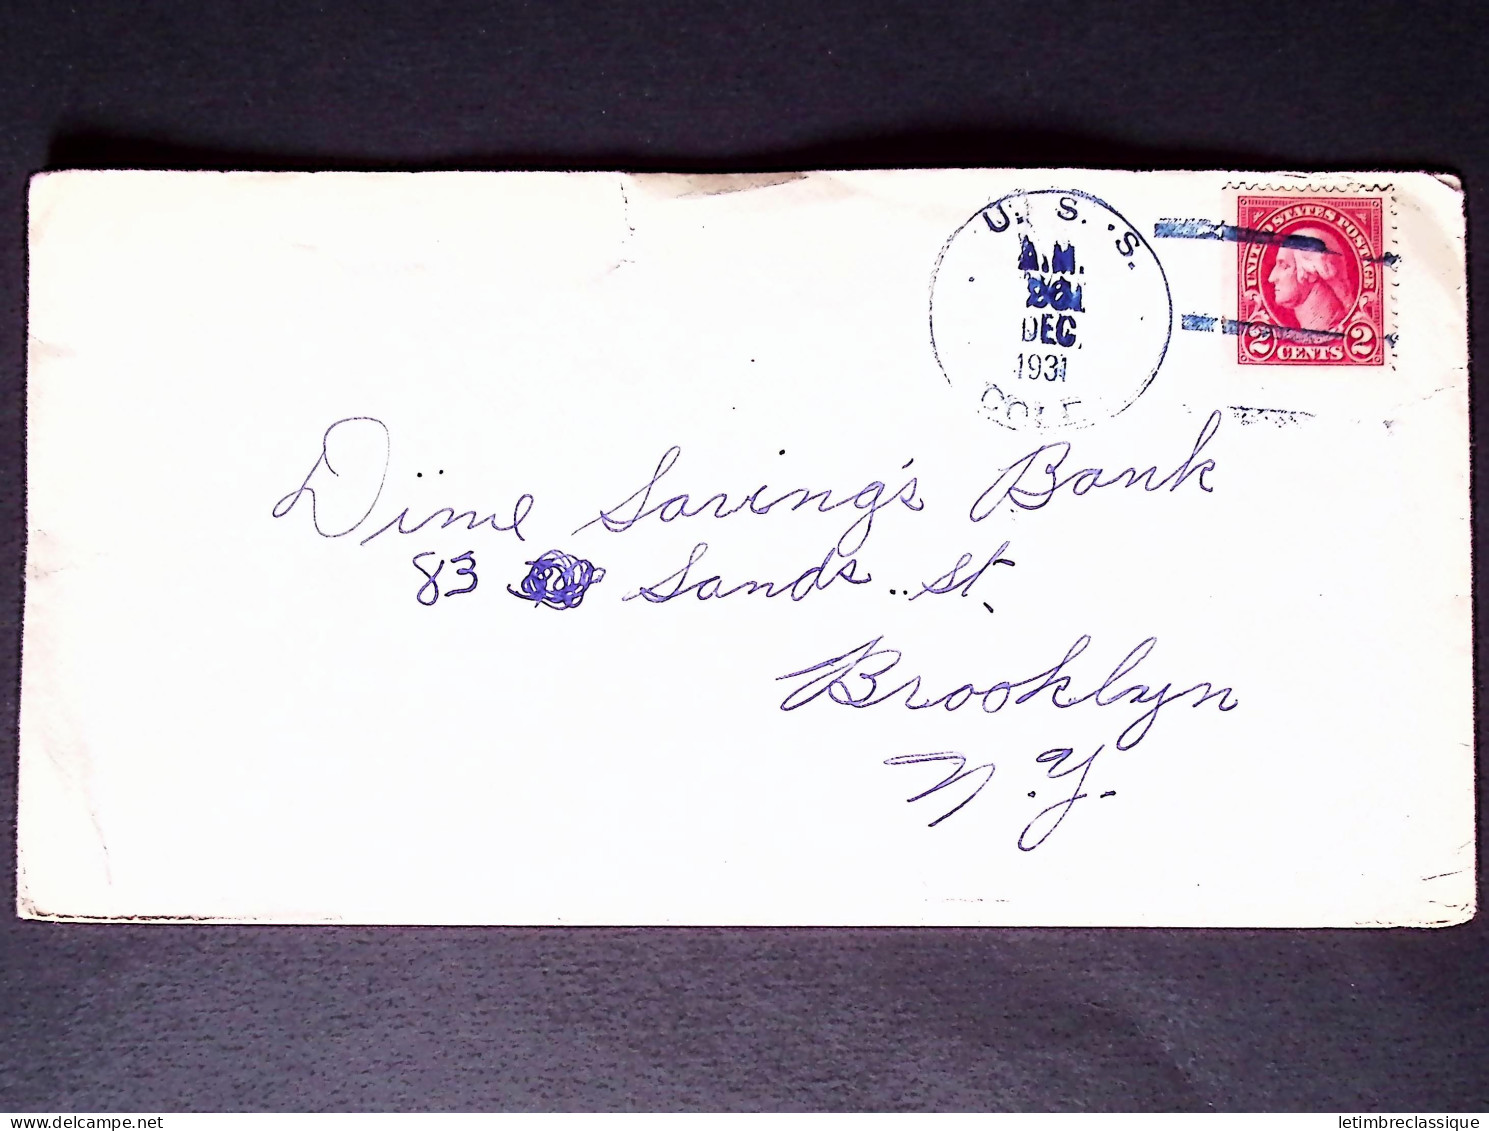 Lettre 1865-1969, Lot of 18 covers and cards from all periods, noted several mixed frankings such a the Canal Zone, also